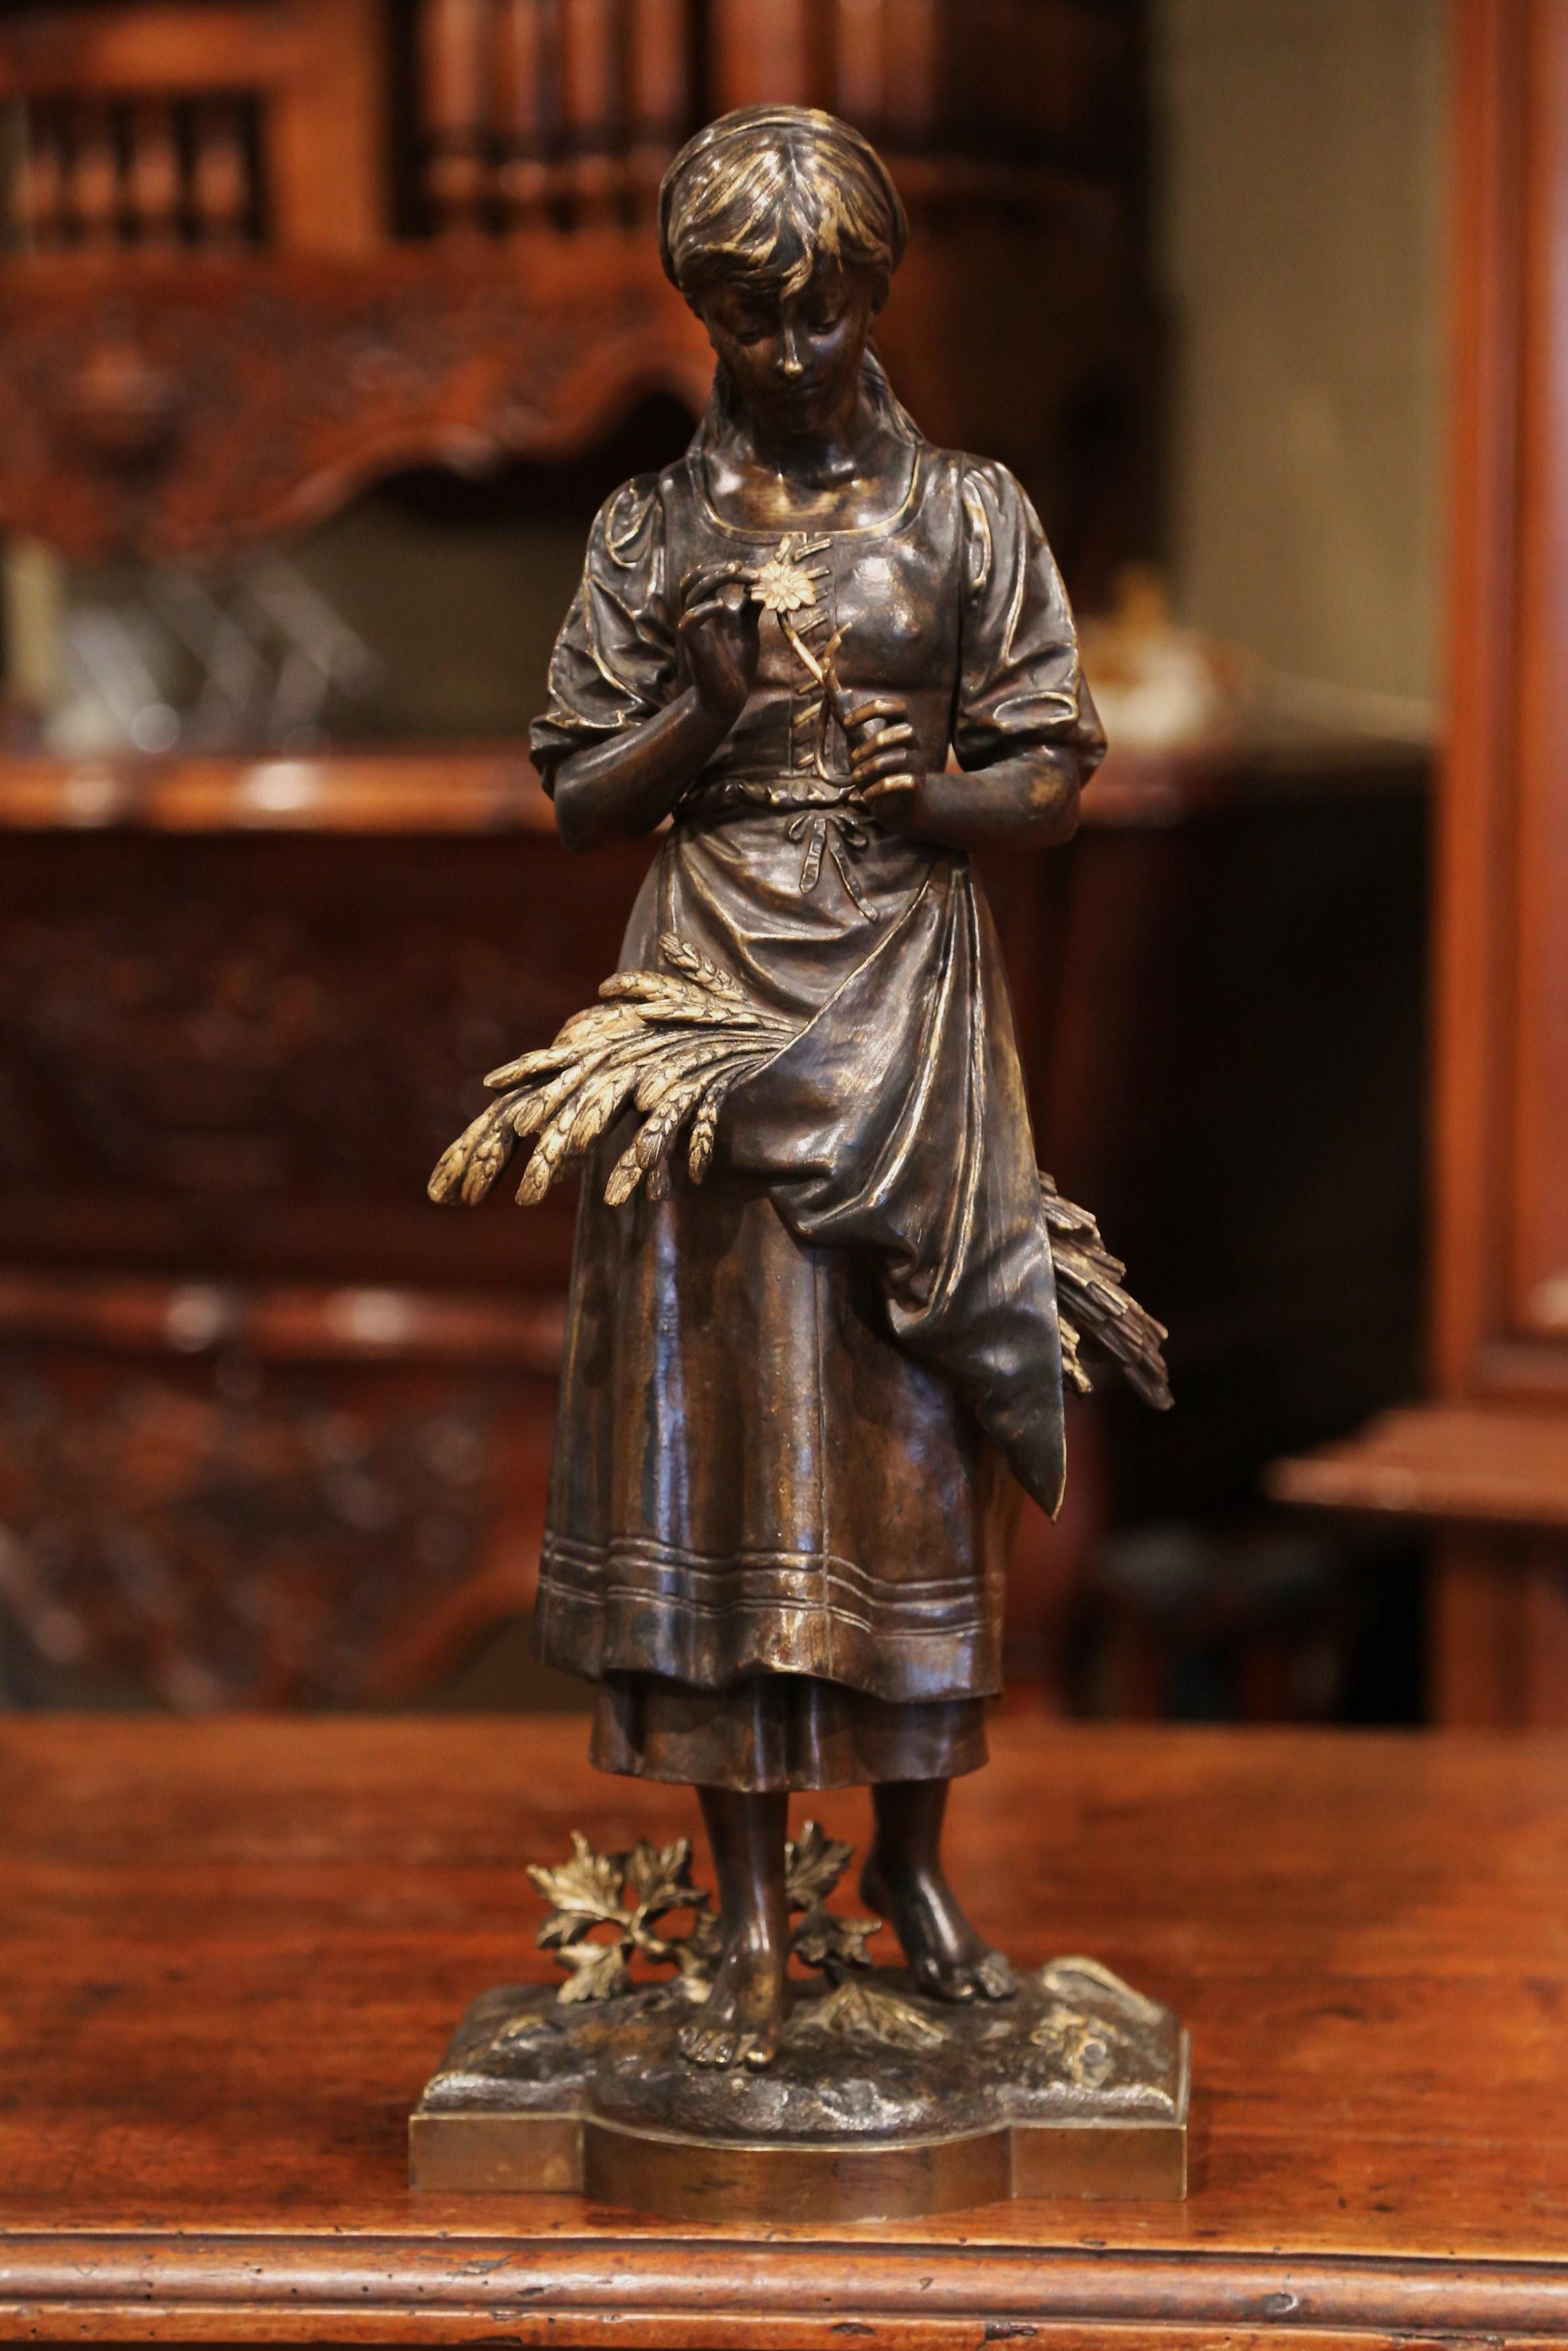 19th Century French Patinated Bronze Woman Figure Signed Eutrope Bouret 1